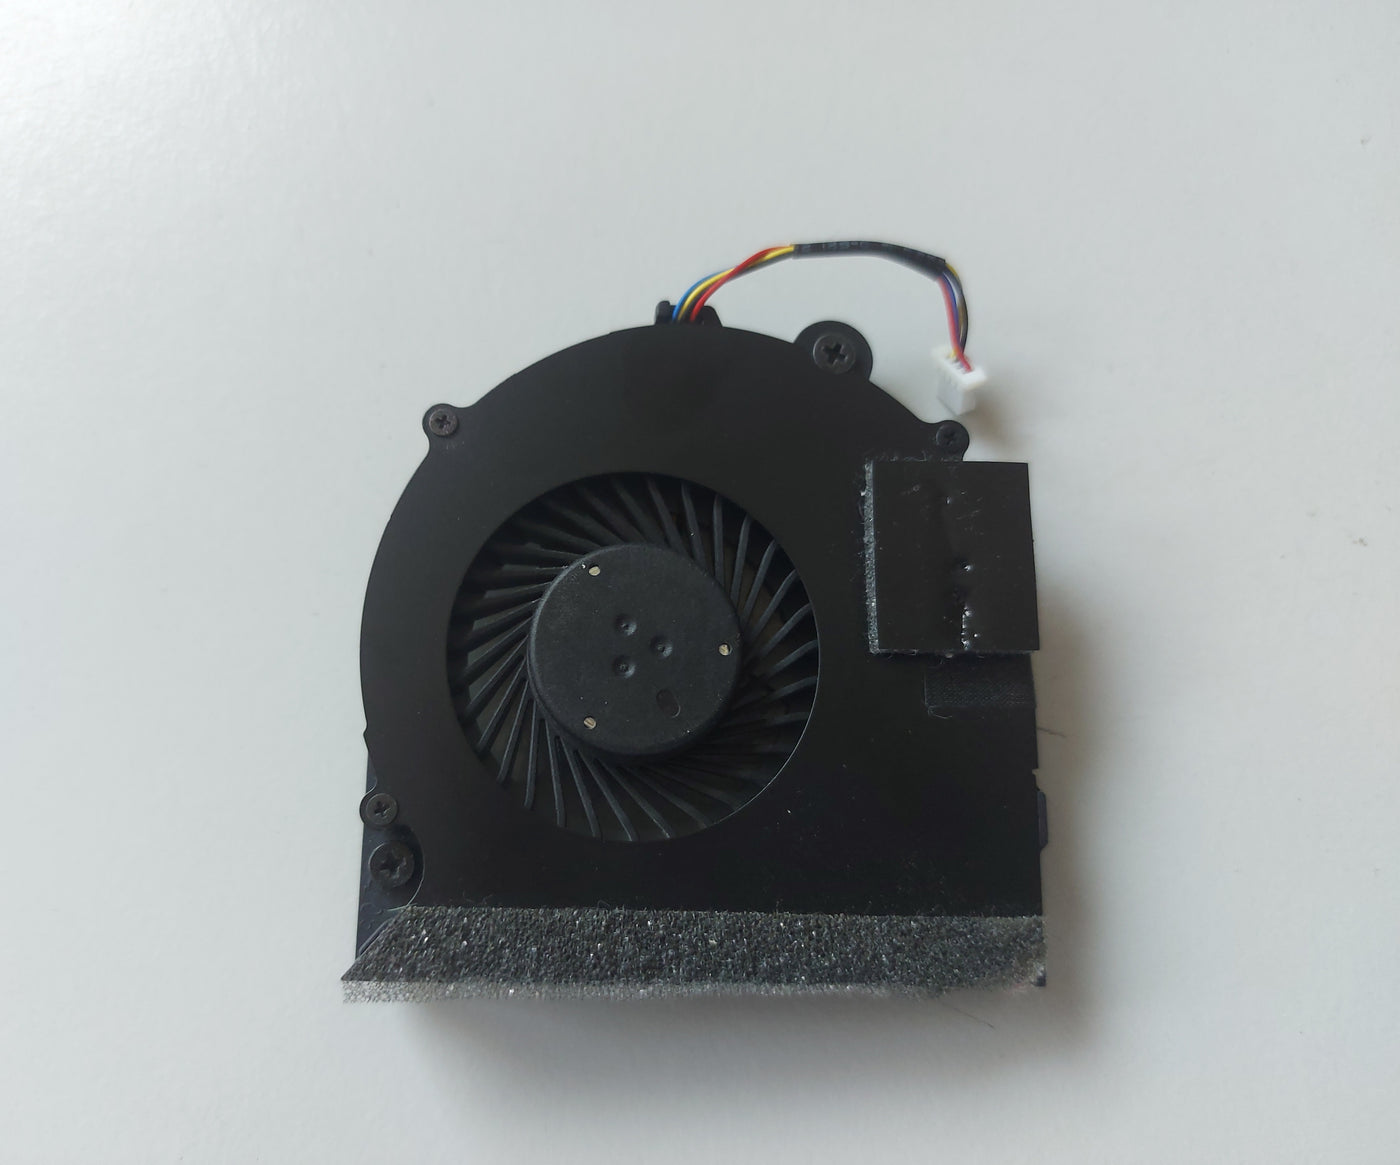 Delta HP DC05V 0.32A Brushless CPU Cooling Fan for HP Probook ( KSB05105HB 639474-001 ) USED